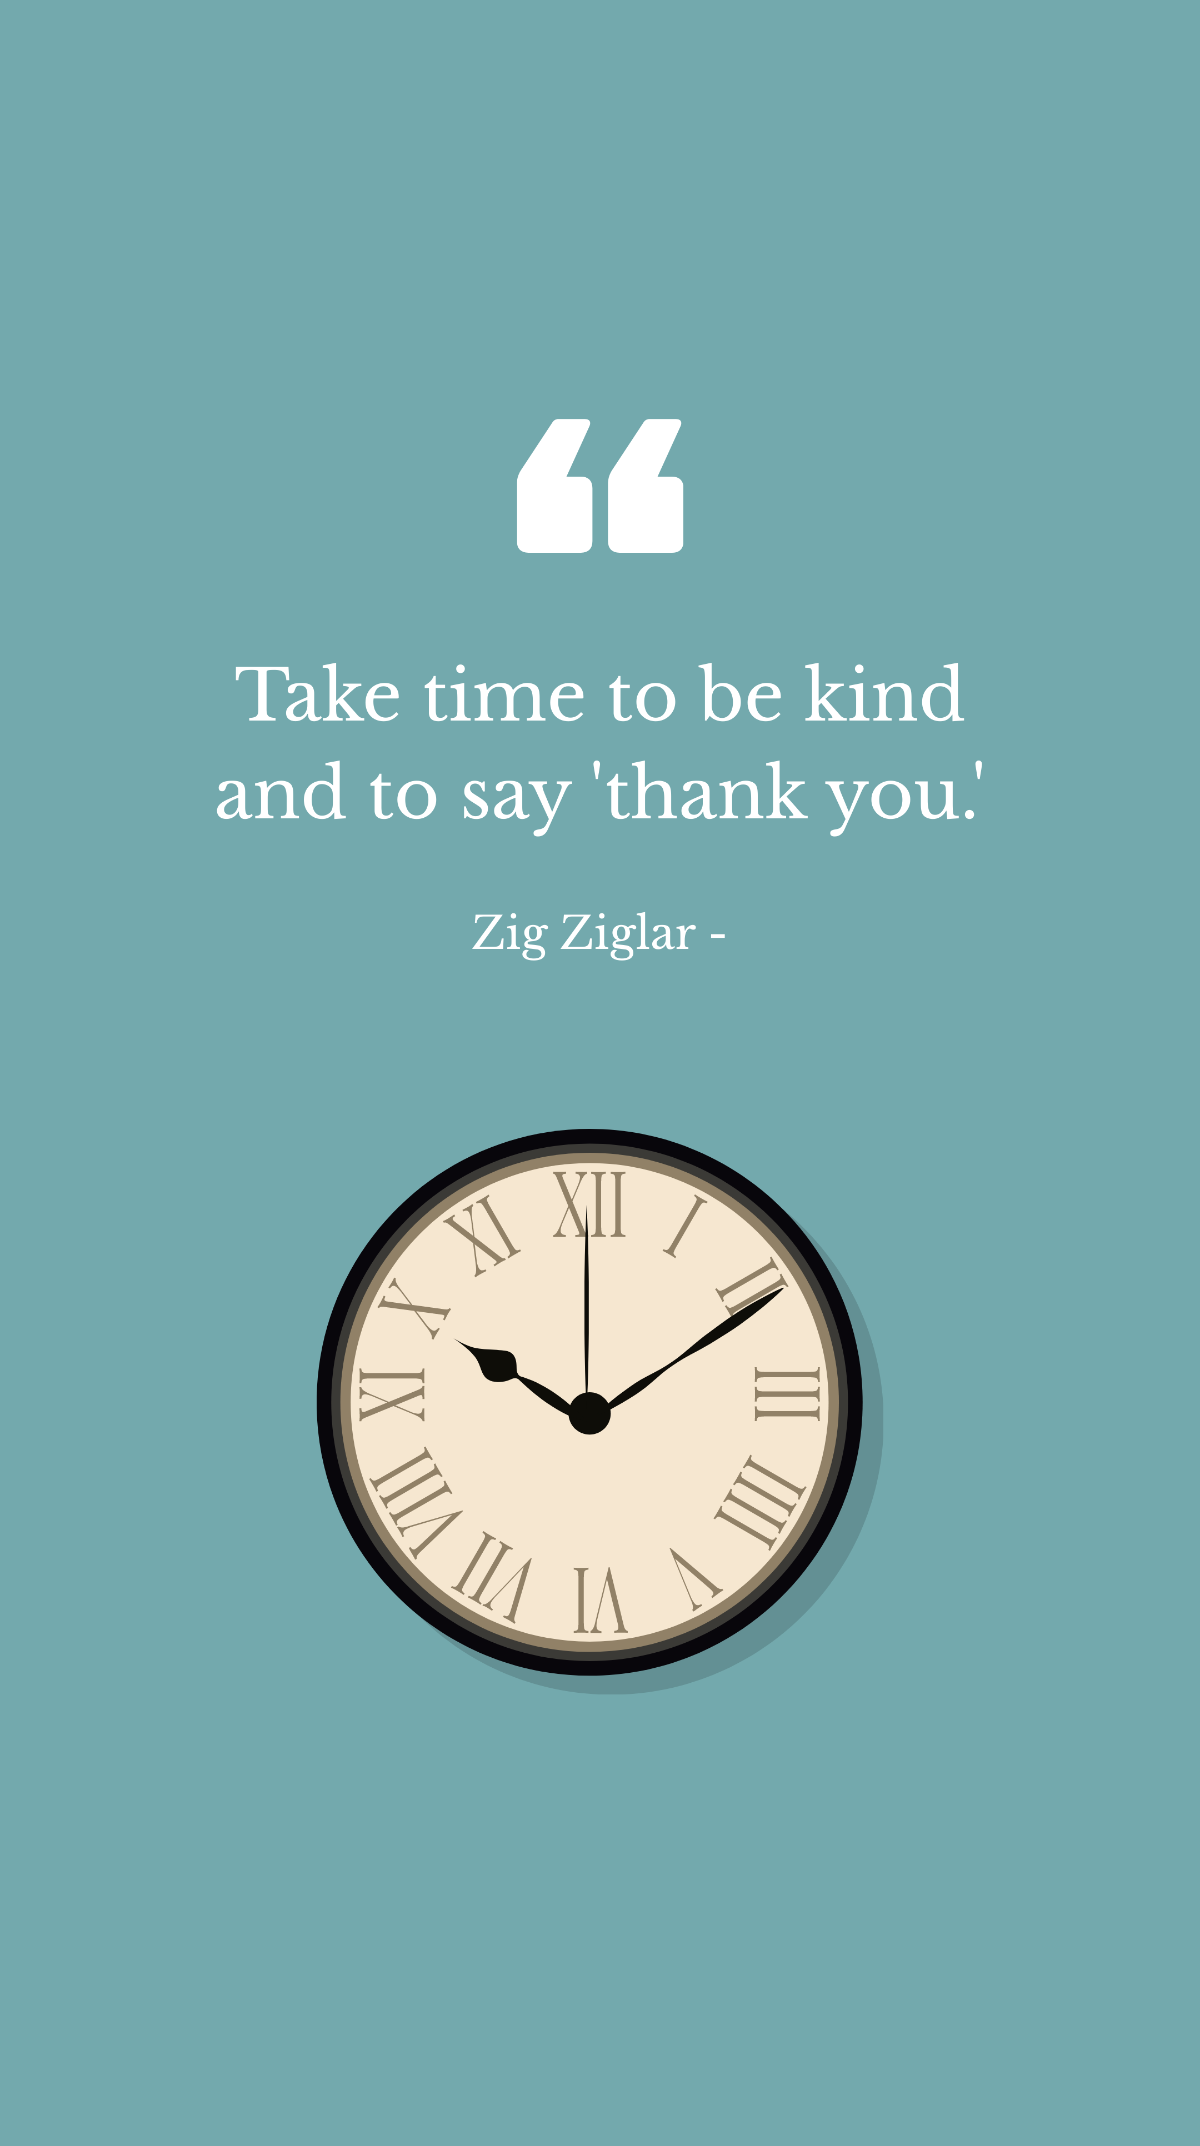 Free Zig Ziglar - Take time to be kind and to say 'thank you.' Template